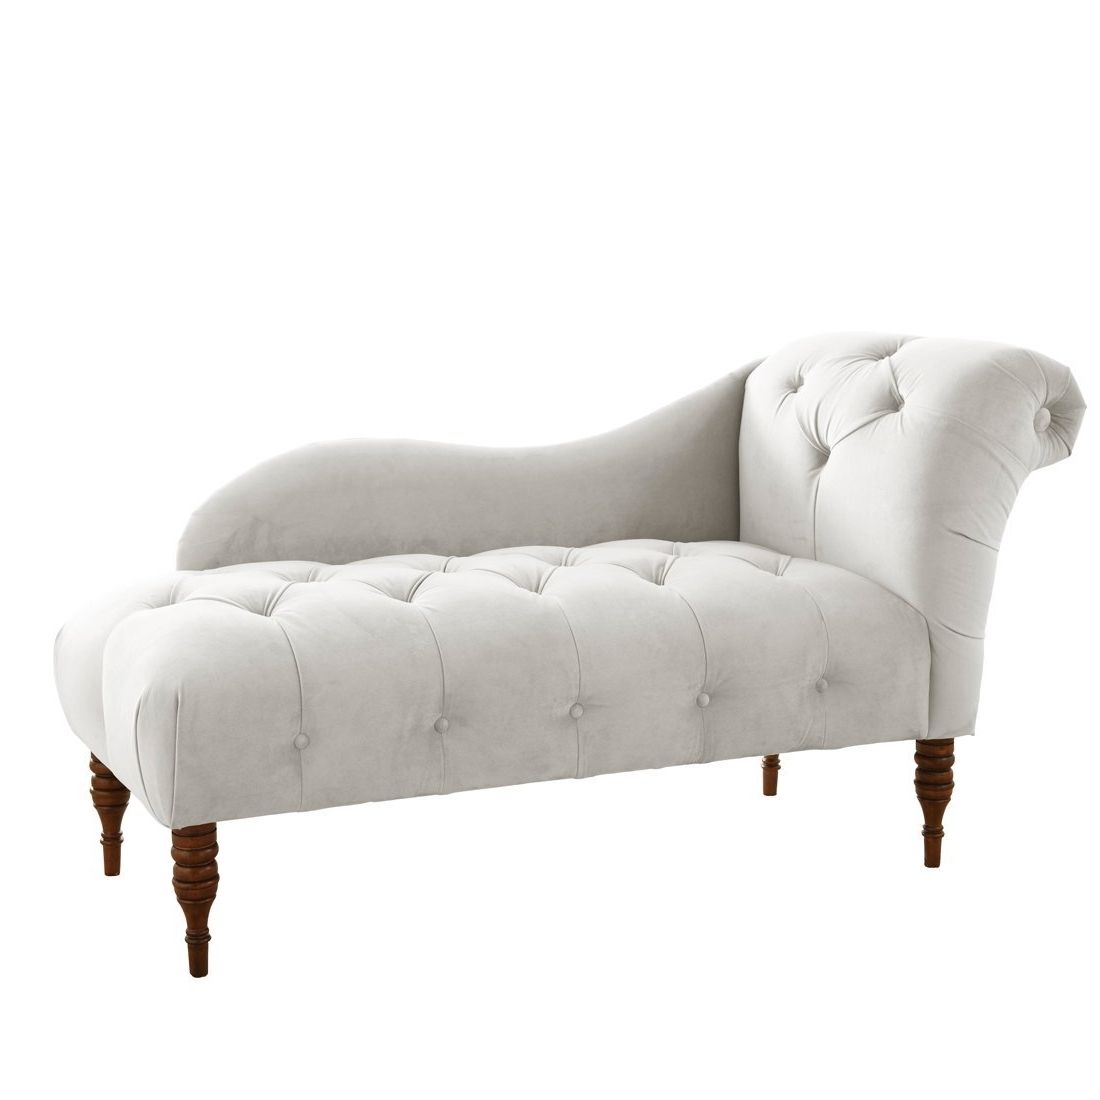 Recent Amazon: Skyline Furniture Tufted Fainting Sofa, Velvet Light For Couches With Chaise Lounge (View 8 of 15)